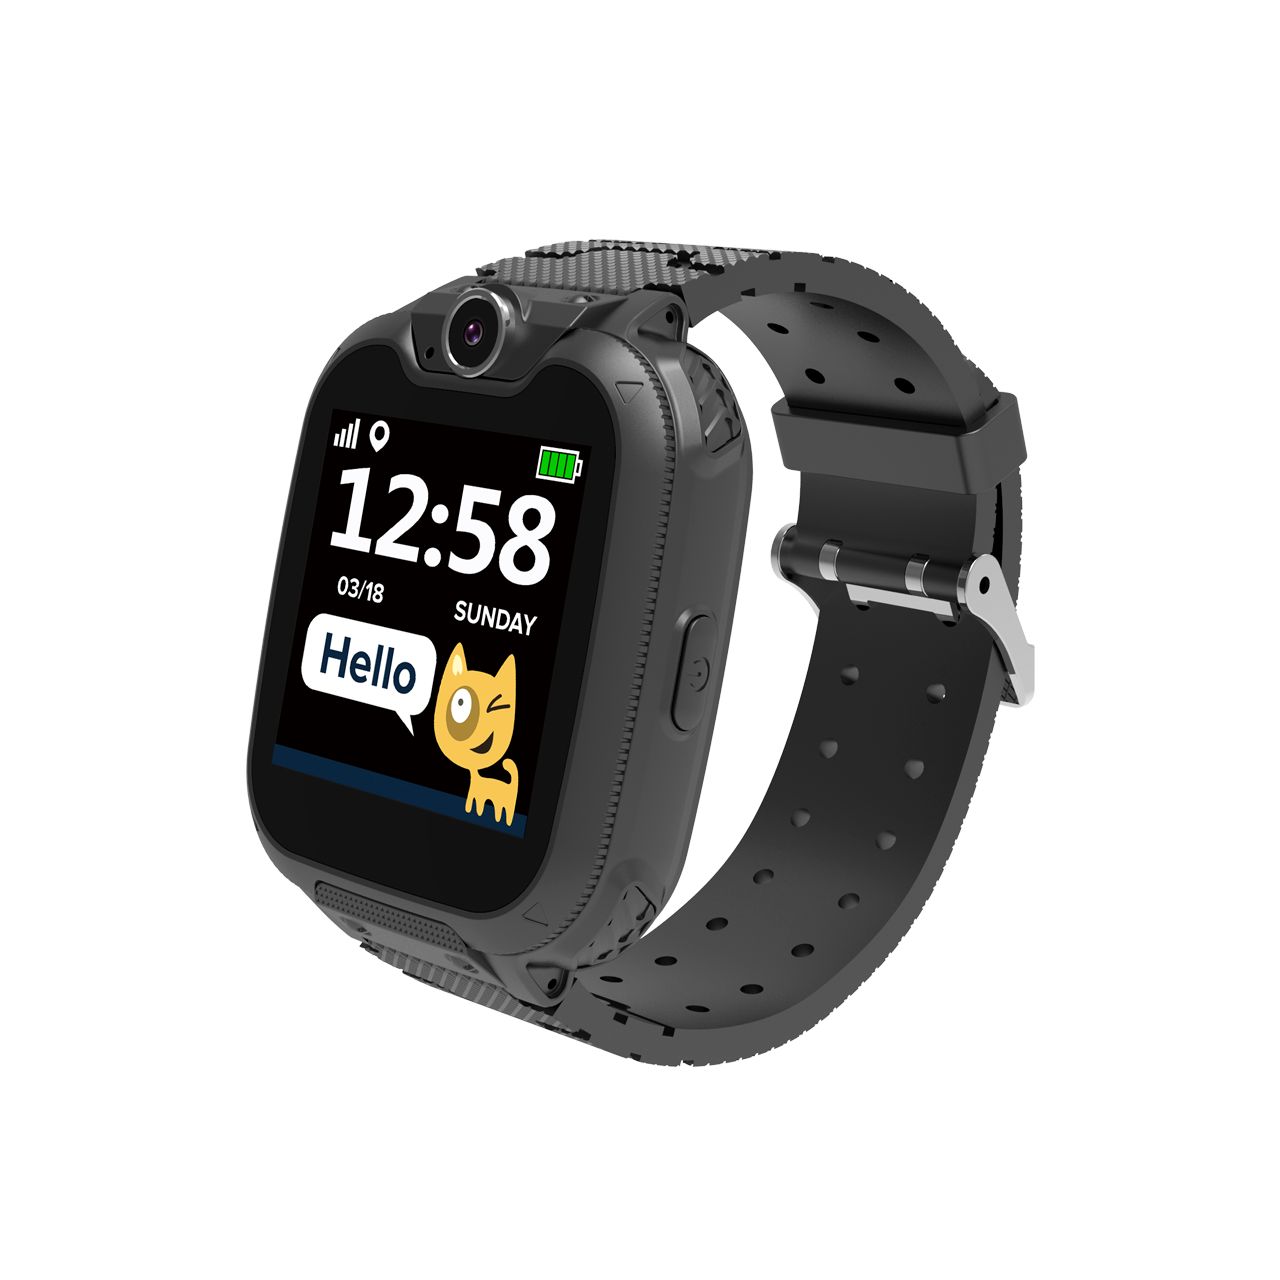 Kids smartwatch, 1.54 inch colorful screen, Camera 0.3MP, Mirco SIM card, 32+32MB, GSM(850/900/1800/1900MHz), 7 games inside, 380mAh battery, compatibility with iOS and android, Black, host: 54*42.6*13.6mm, strap: 230*20mm, 45g_1